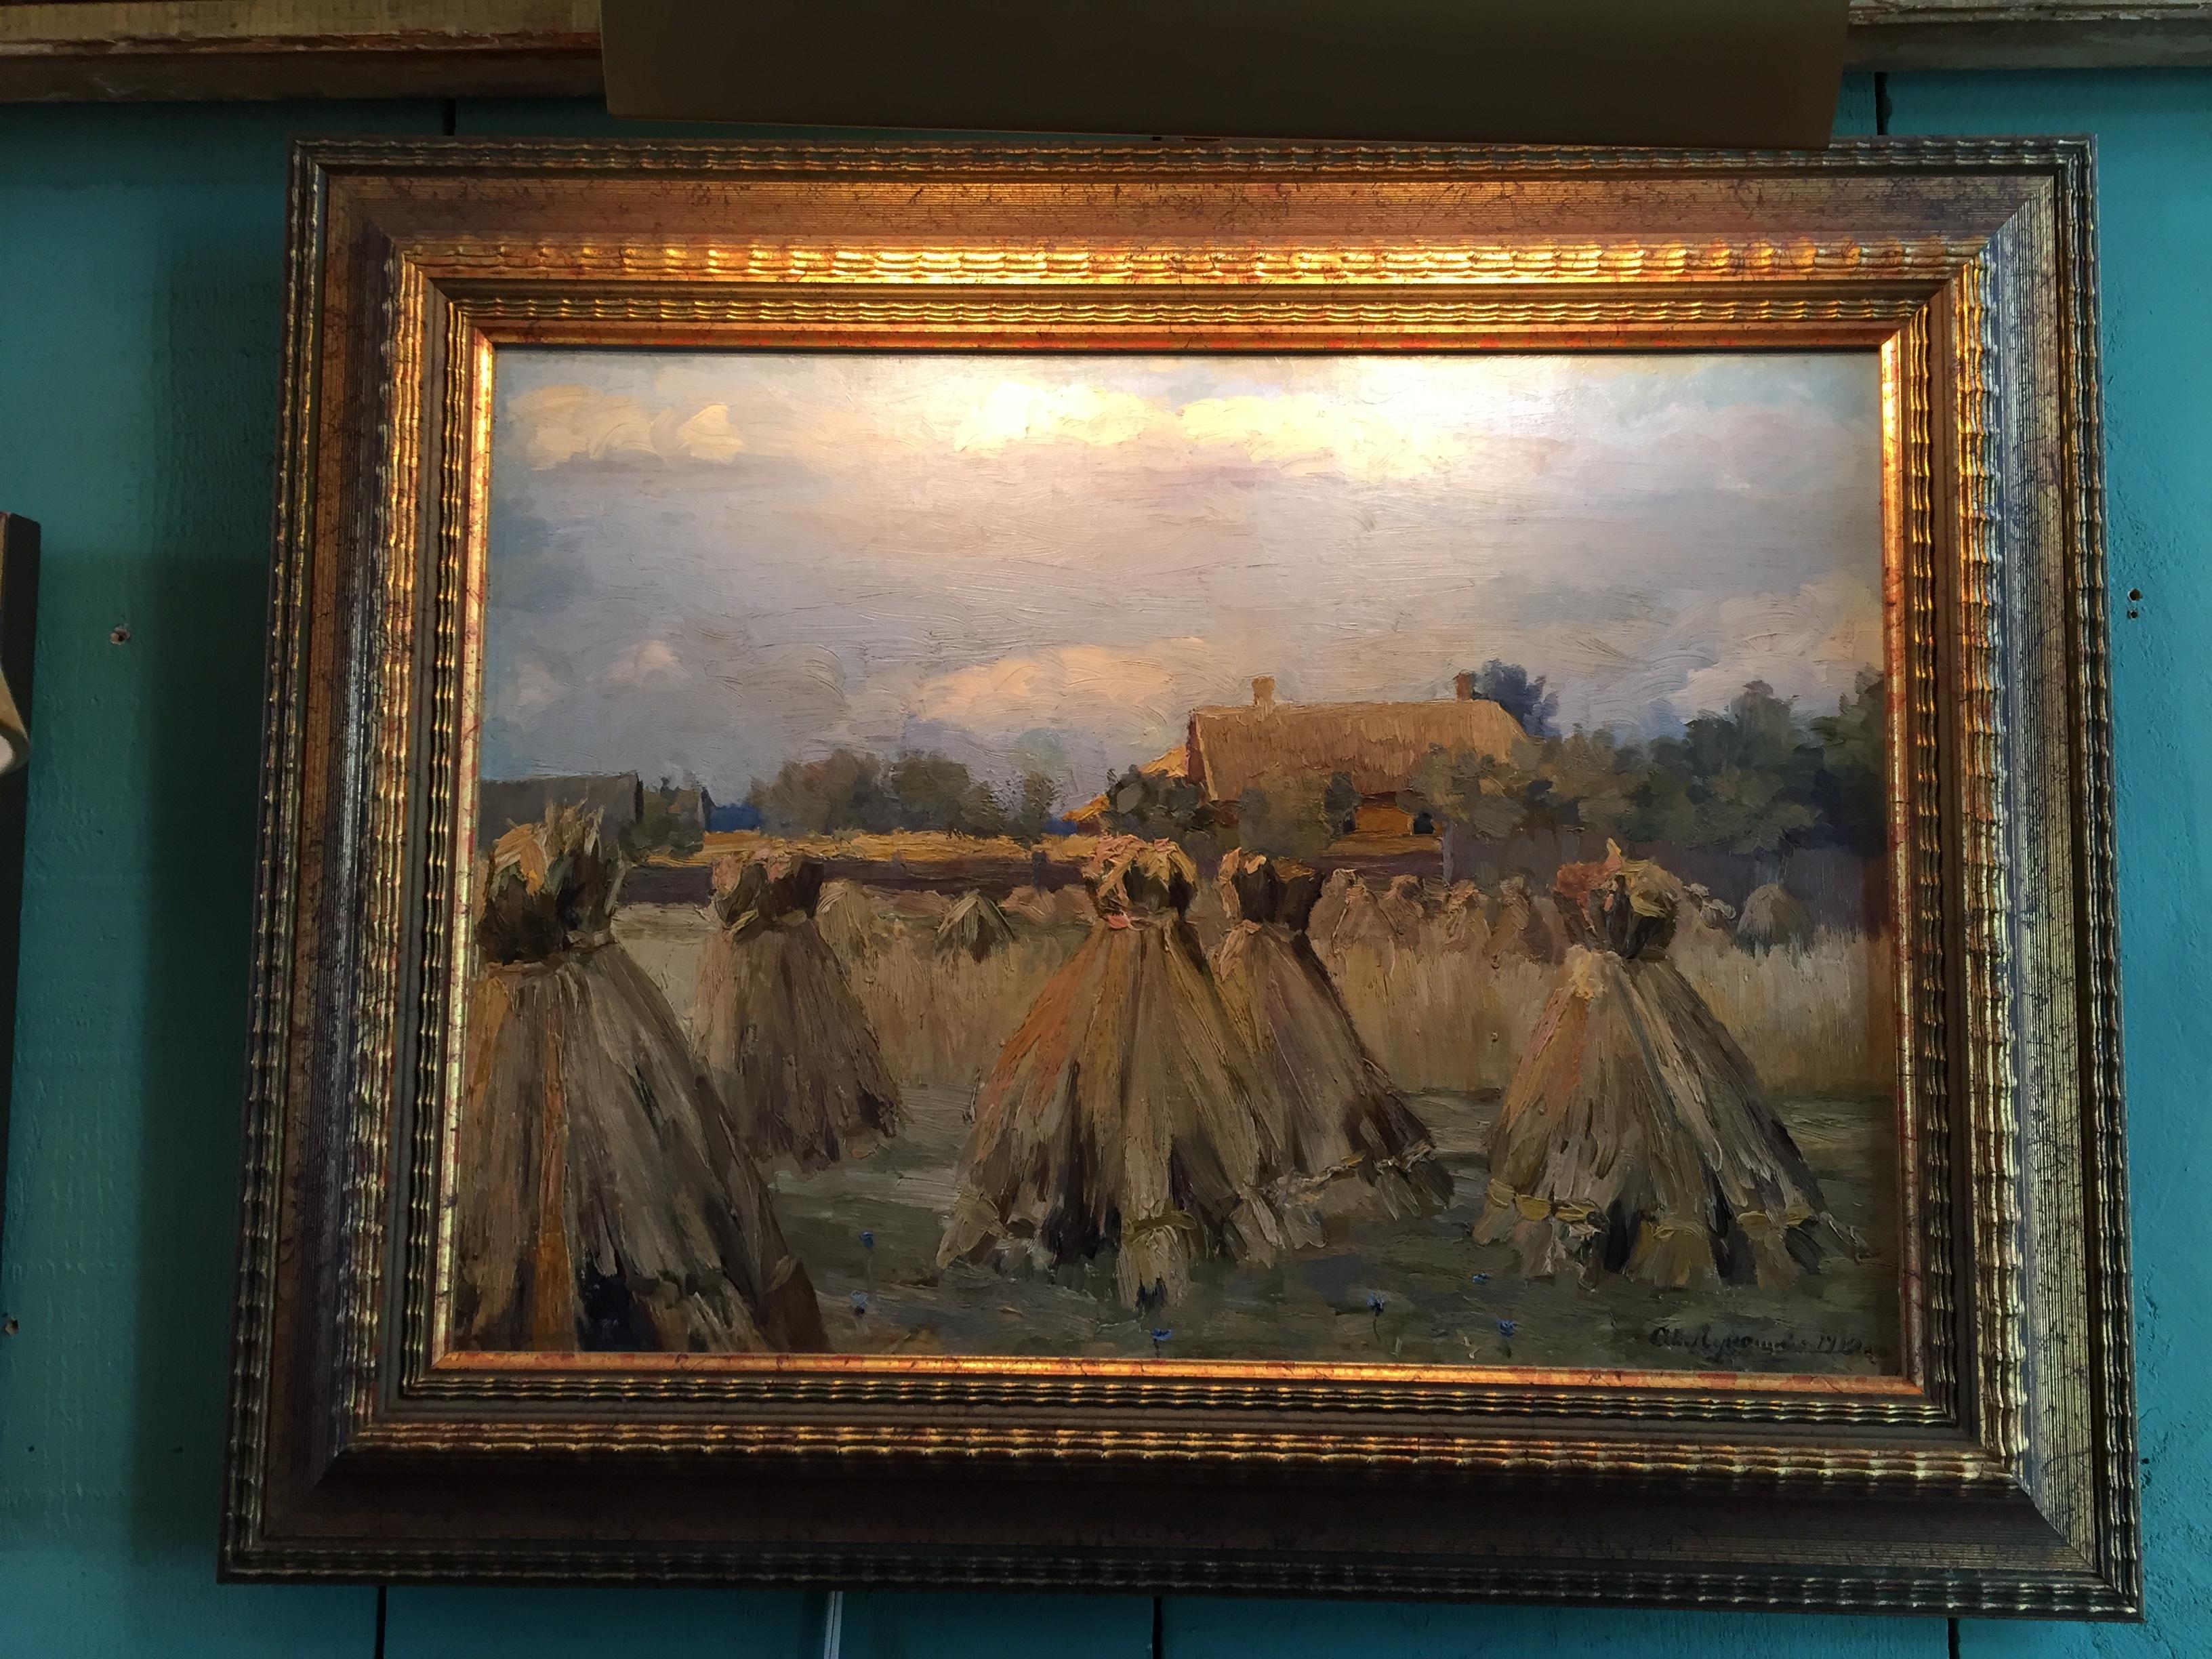 A very nice tableau of Haystack Harvest scene by Alexandre Alexandrovich, circa 1910, 20th century. A beautiful depiction of the Harvest season in the fields. With a house and a forest in the background. Cloudy Skies. Very Romantic and decorative.